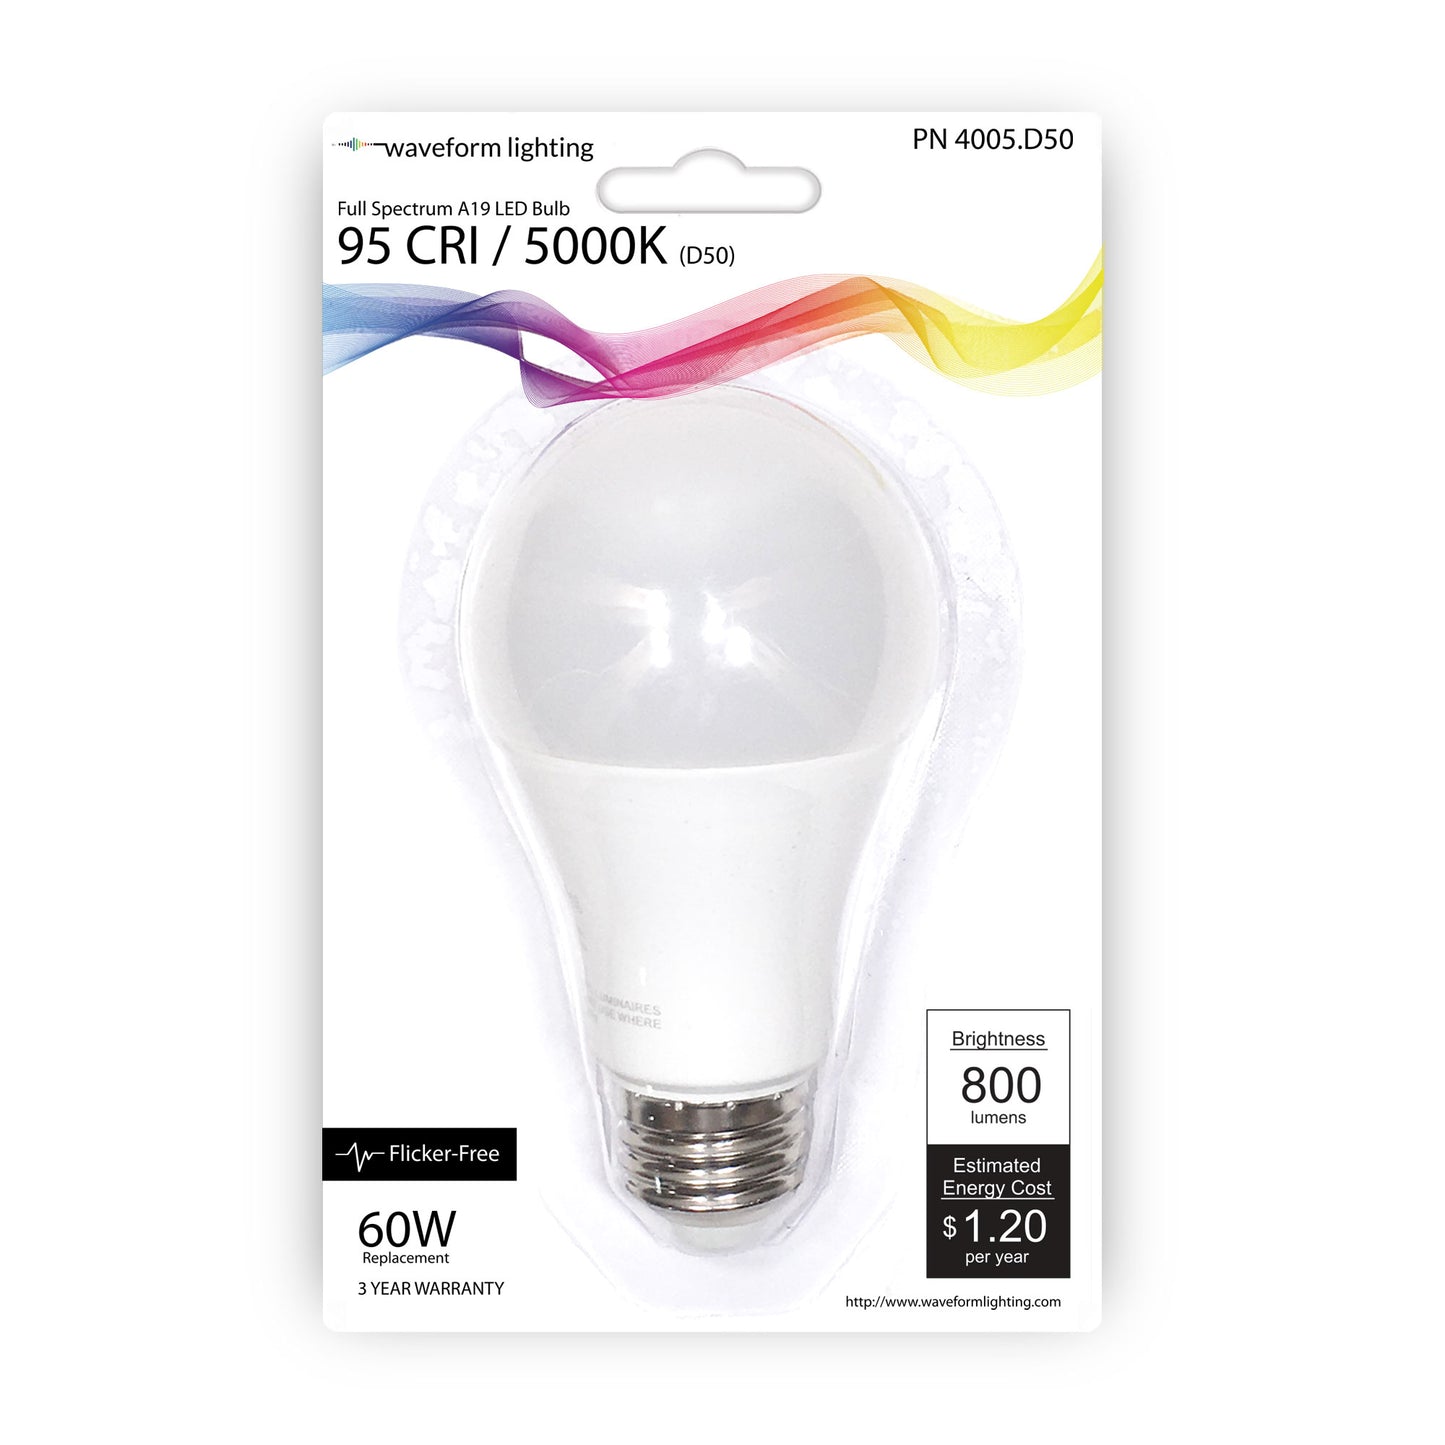 D50 5000K A19 LED Bulb for Color Matching (ISO3664:2000)